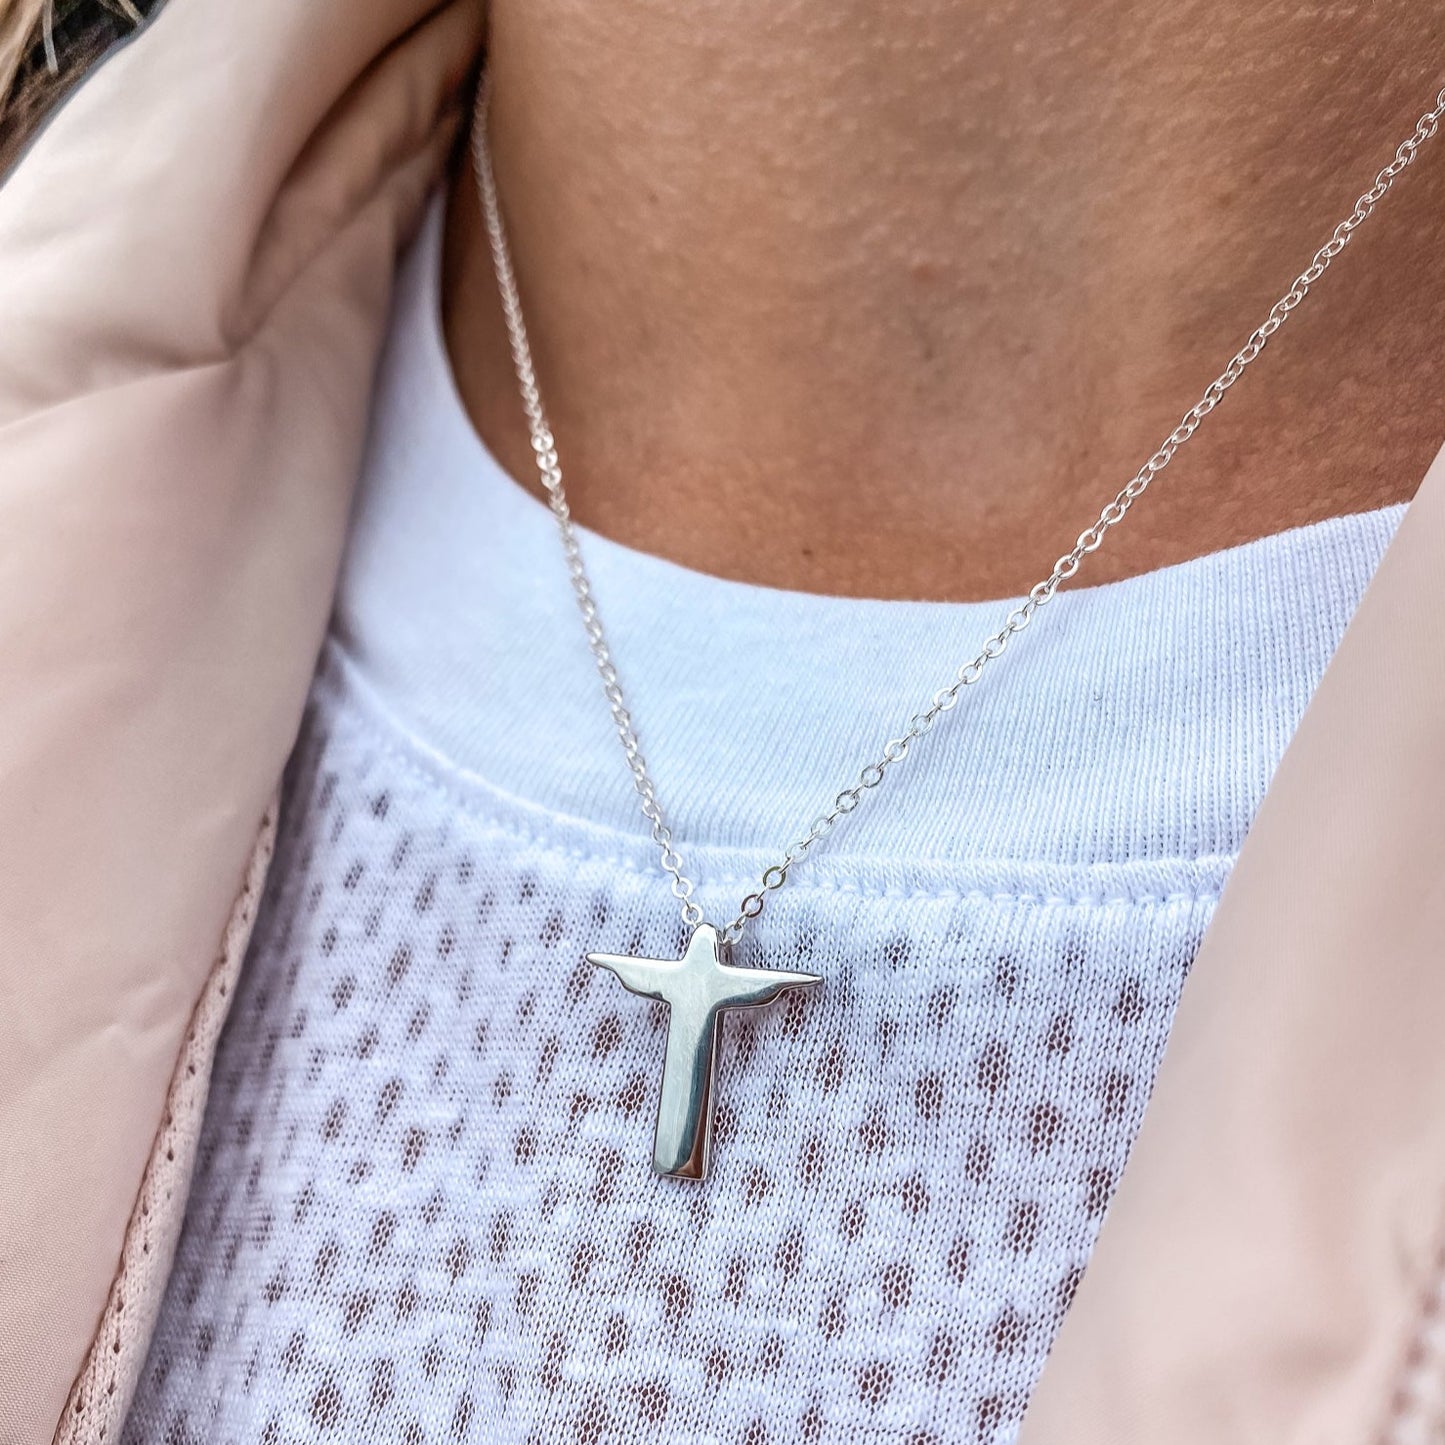 Christ the Redeemer Pendant Necklace in Sterling Silver made by Born to Rock Jewelry